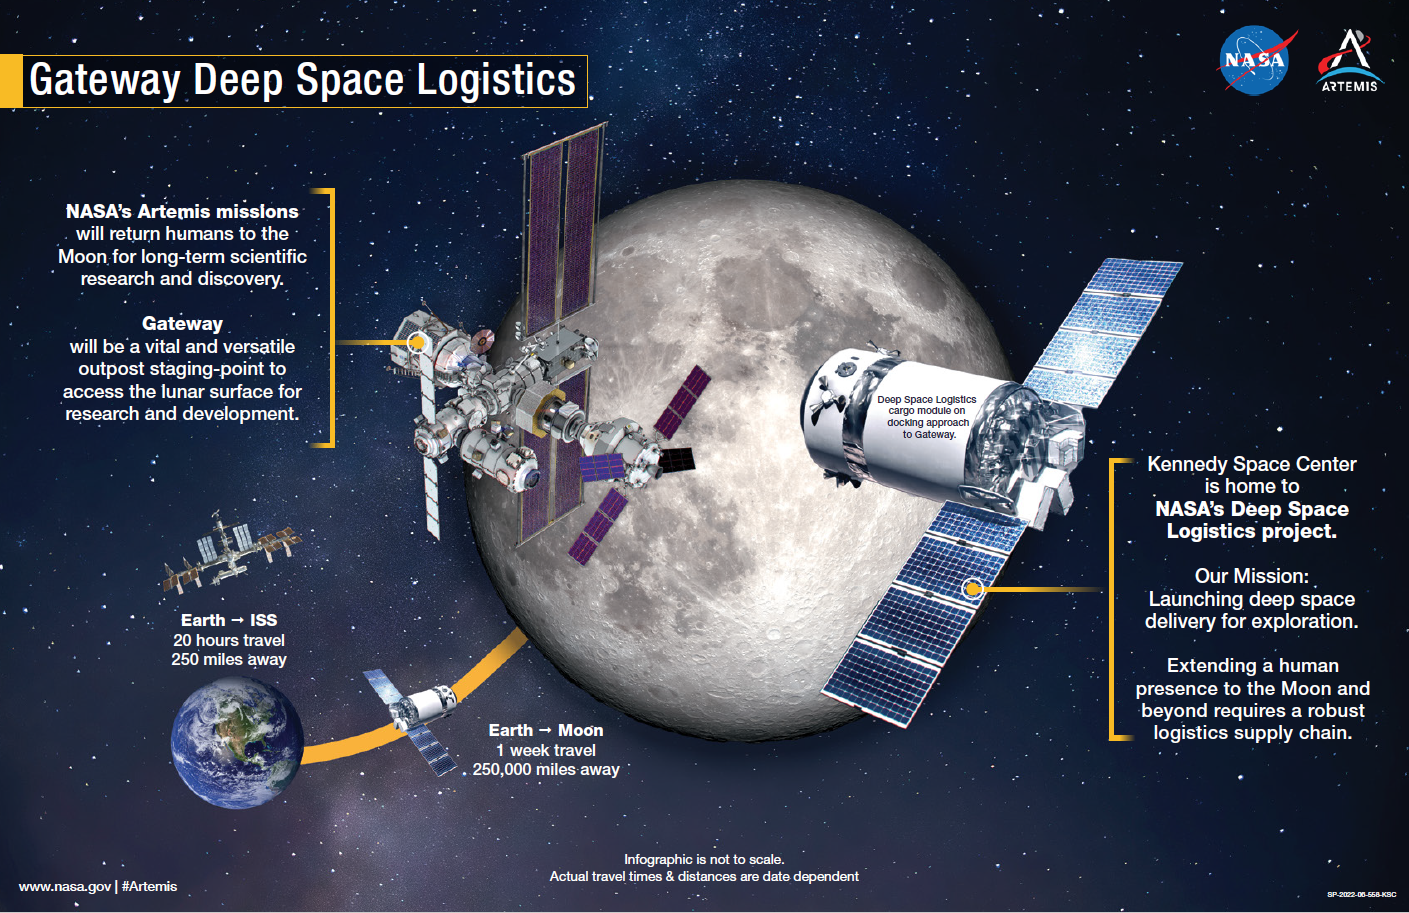 An illustration showcasing how NASA's Deep Space Logistics Office supports the agency's Gateway